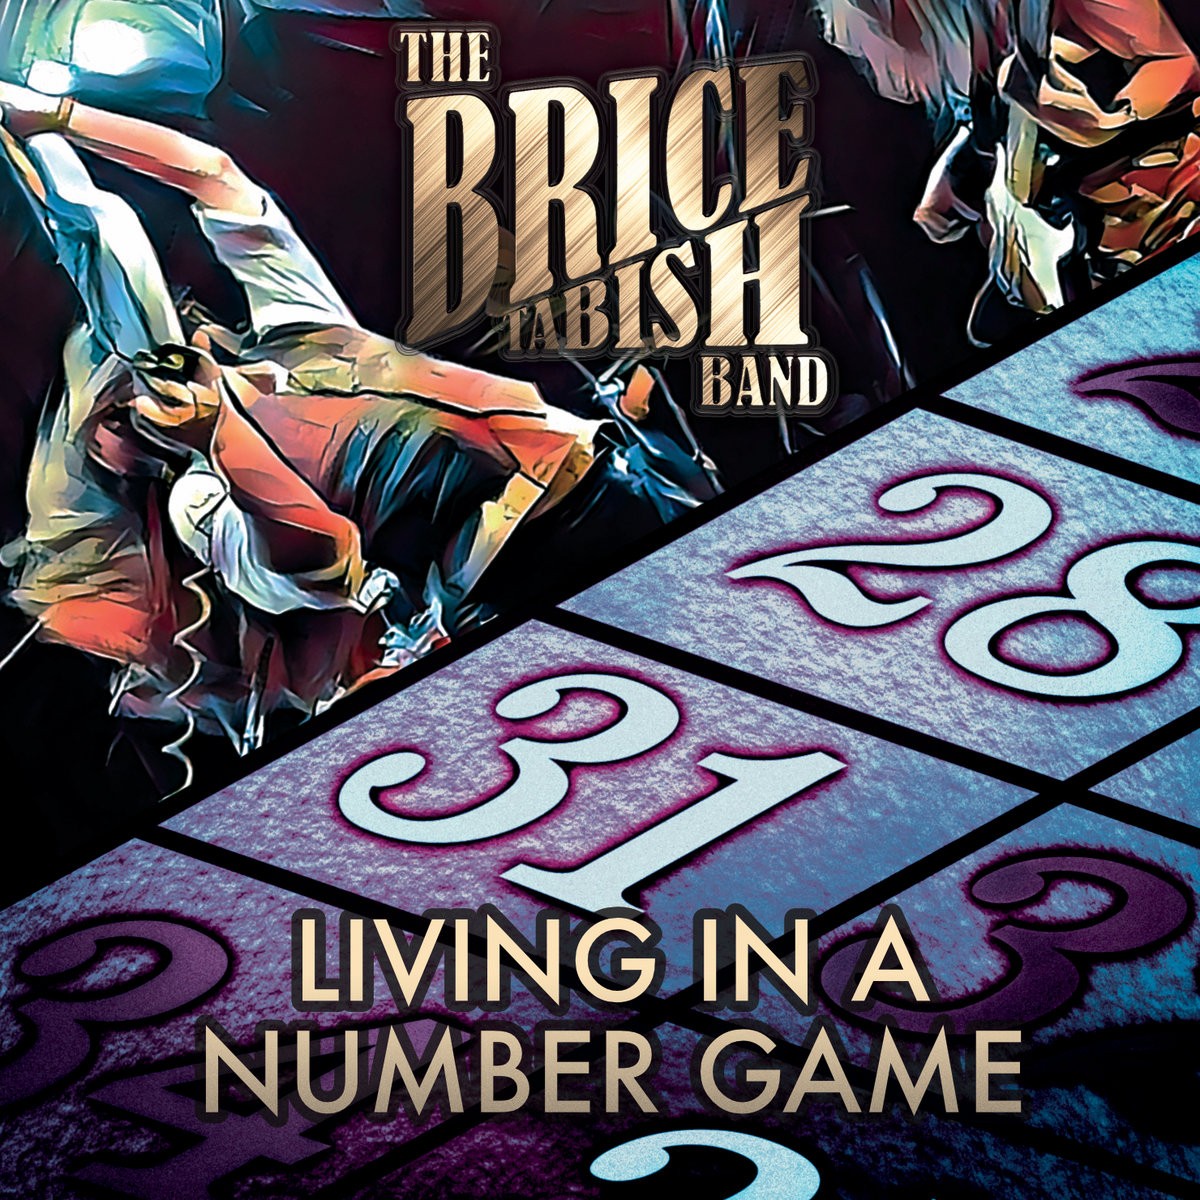 The Brice Tabish Band - Living In A Number Game